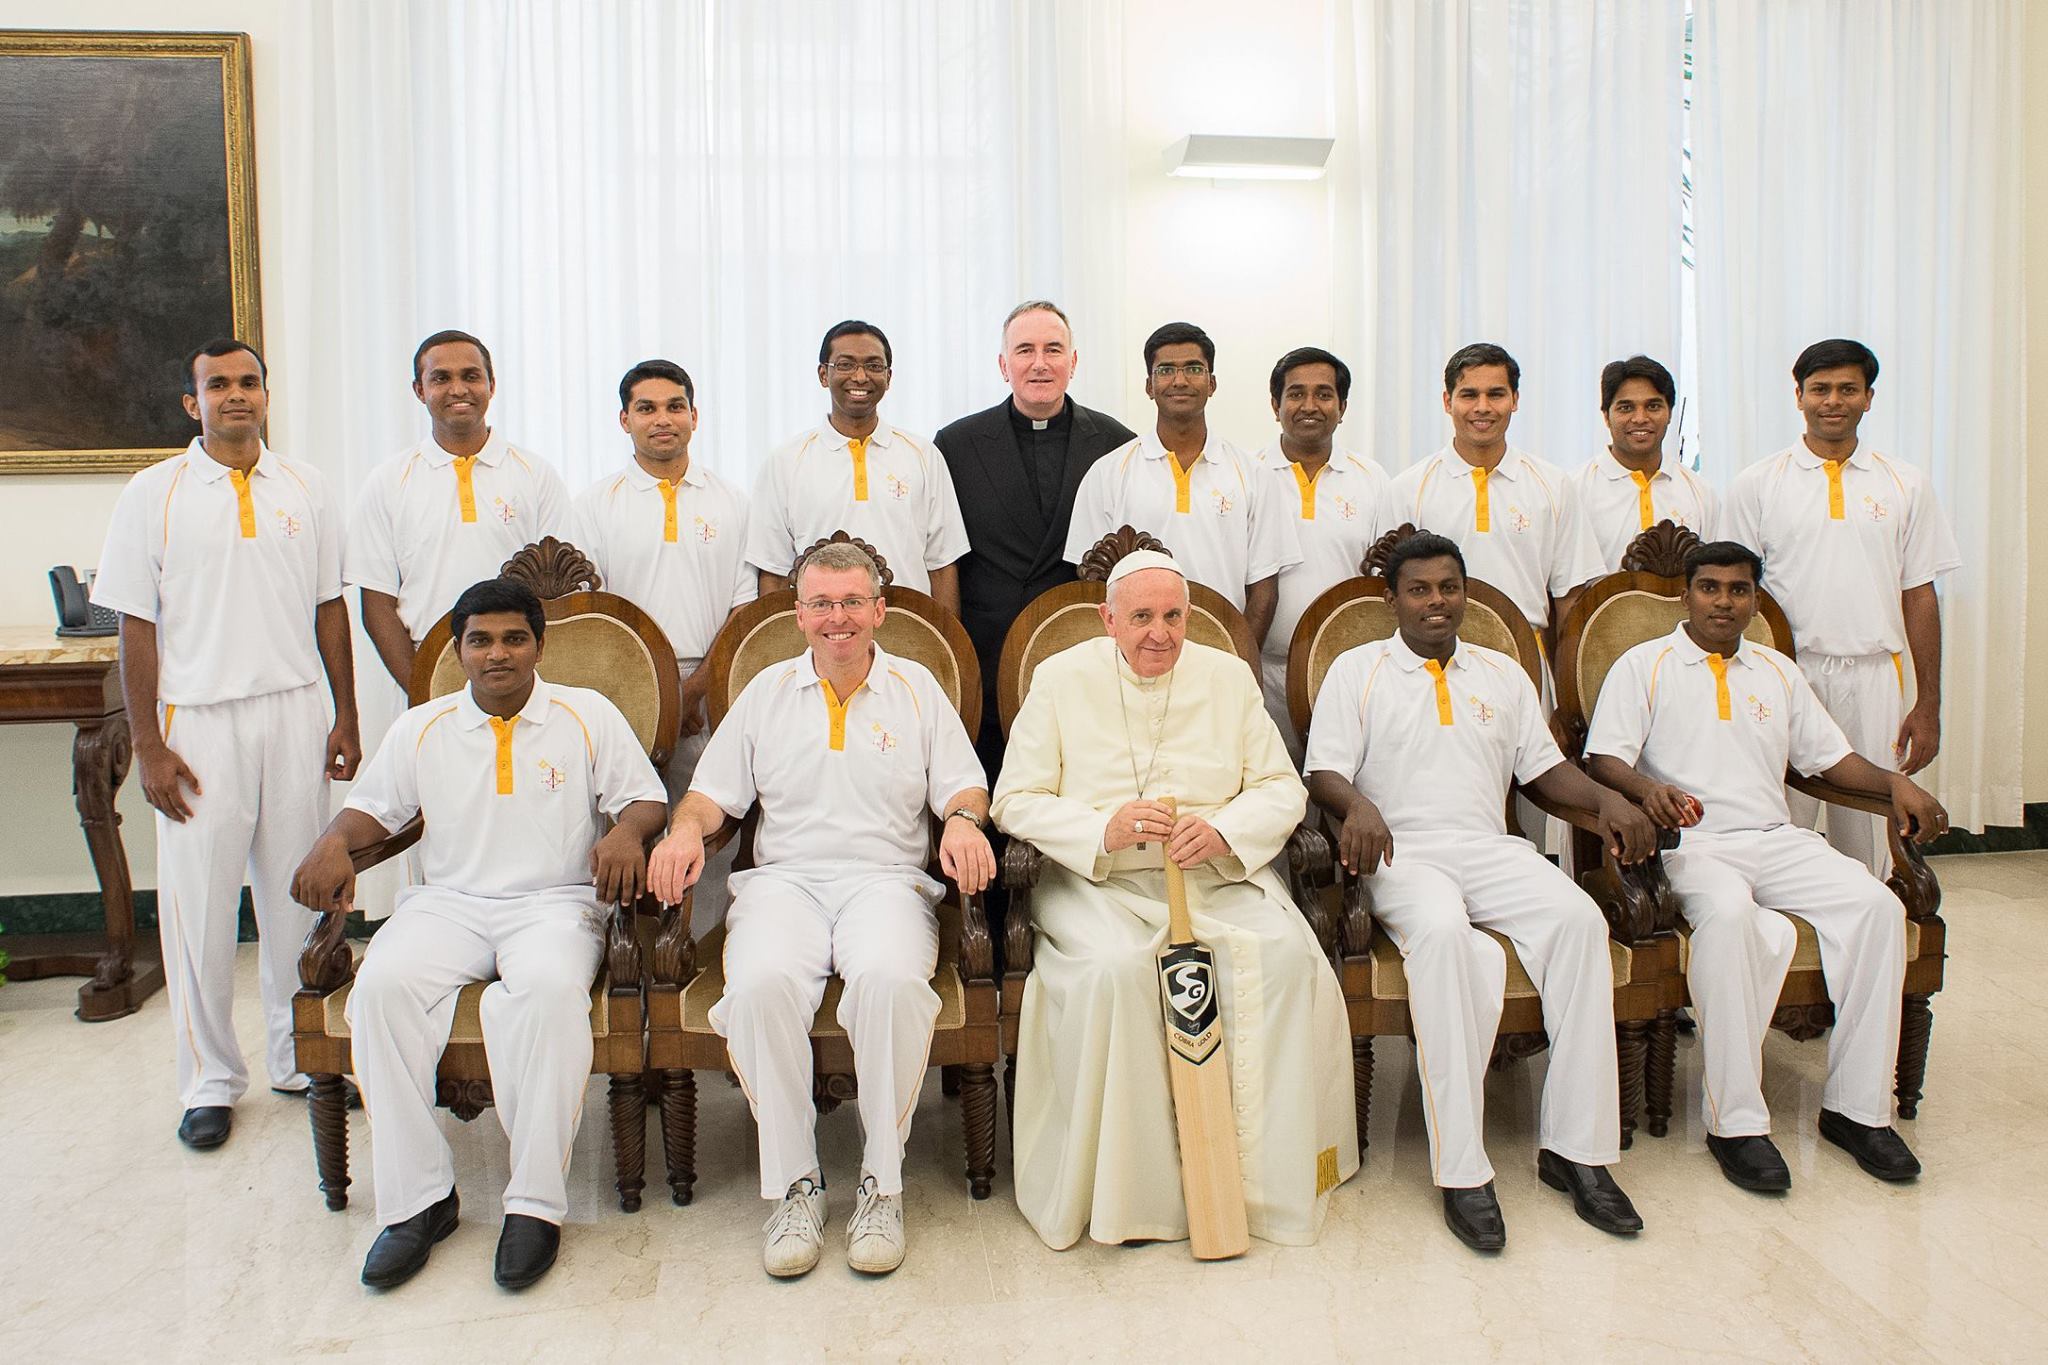 Cardinal Ravasi of the Pontifical Council for Culture presented the priests and seminarians of the St Peter's Cricket Club to Pope Francis on 9 September ahead of their Light of Faith Tour to England (12-20 September 2014), which culminates in a match against an Anglican, Church of England XI. Together with the cultural encounter experience of visiting London and Canterbury, they shall be praying at various holy shrines together with our ecumenical partners and raising funds for the Global Freedom Network, which fights against modern slavery and human trafficking